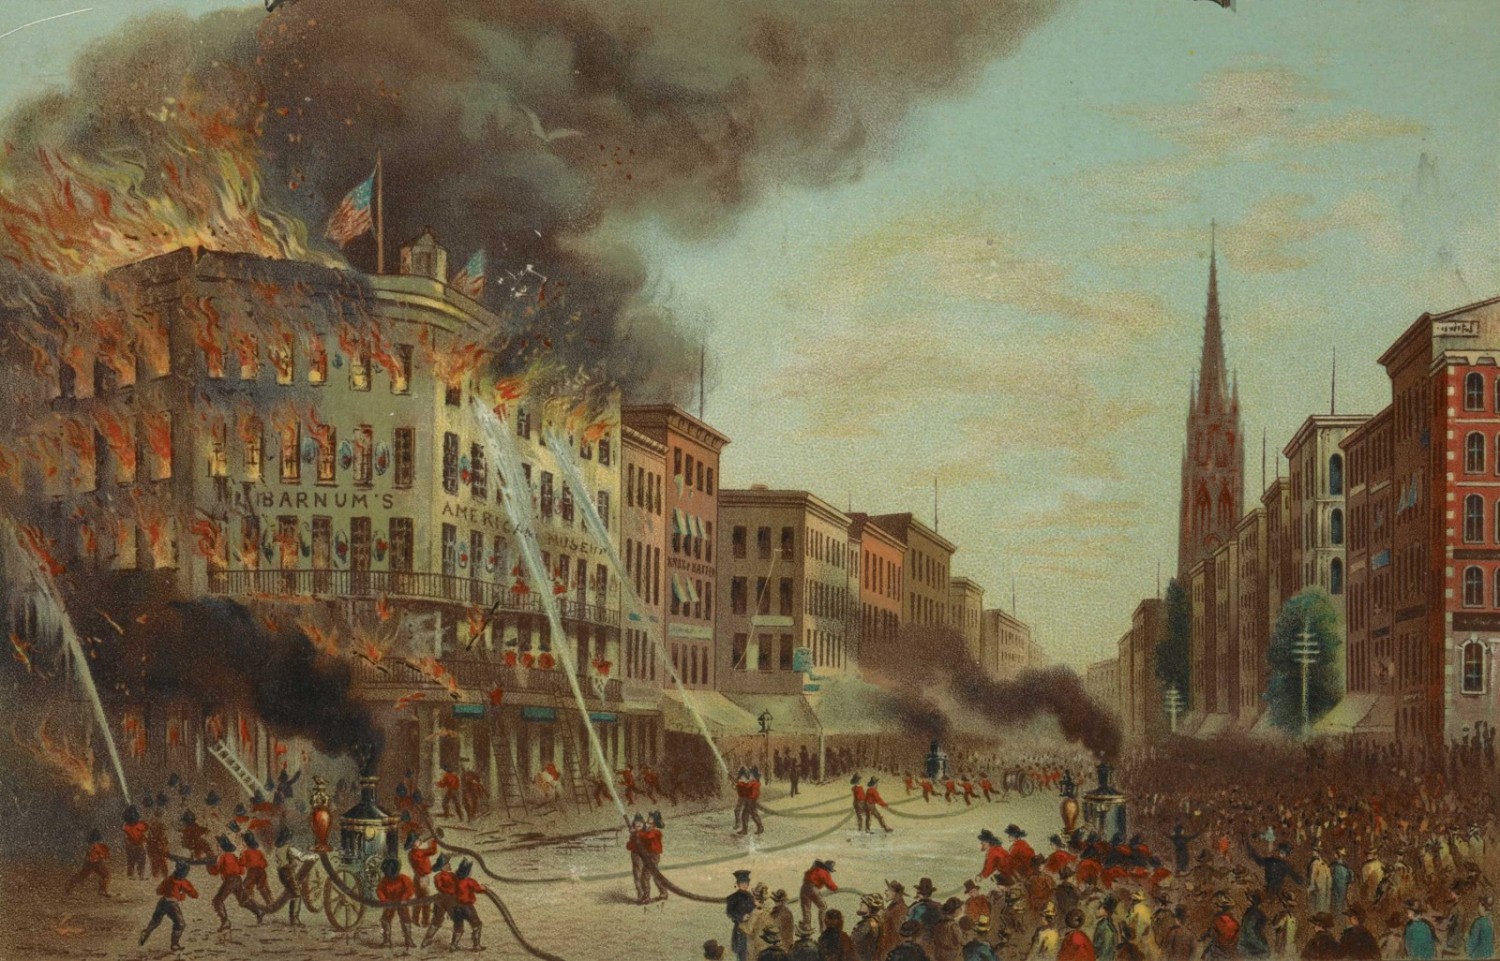 Christopher Pearse Cranch. Burning of Barnum's Museum, July 13th, 1865, 1865. Chromolithograph. Eno Collection Miriam and Ira D. Wallach Division of Art, Prints and Photographs, The New York Public Library